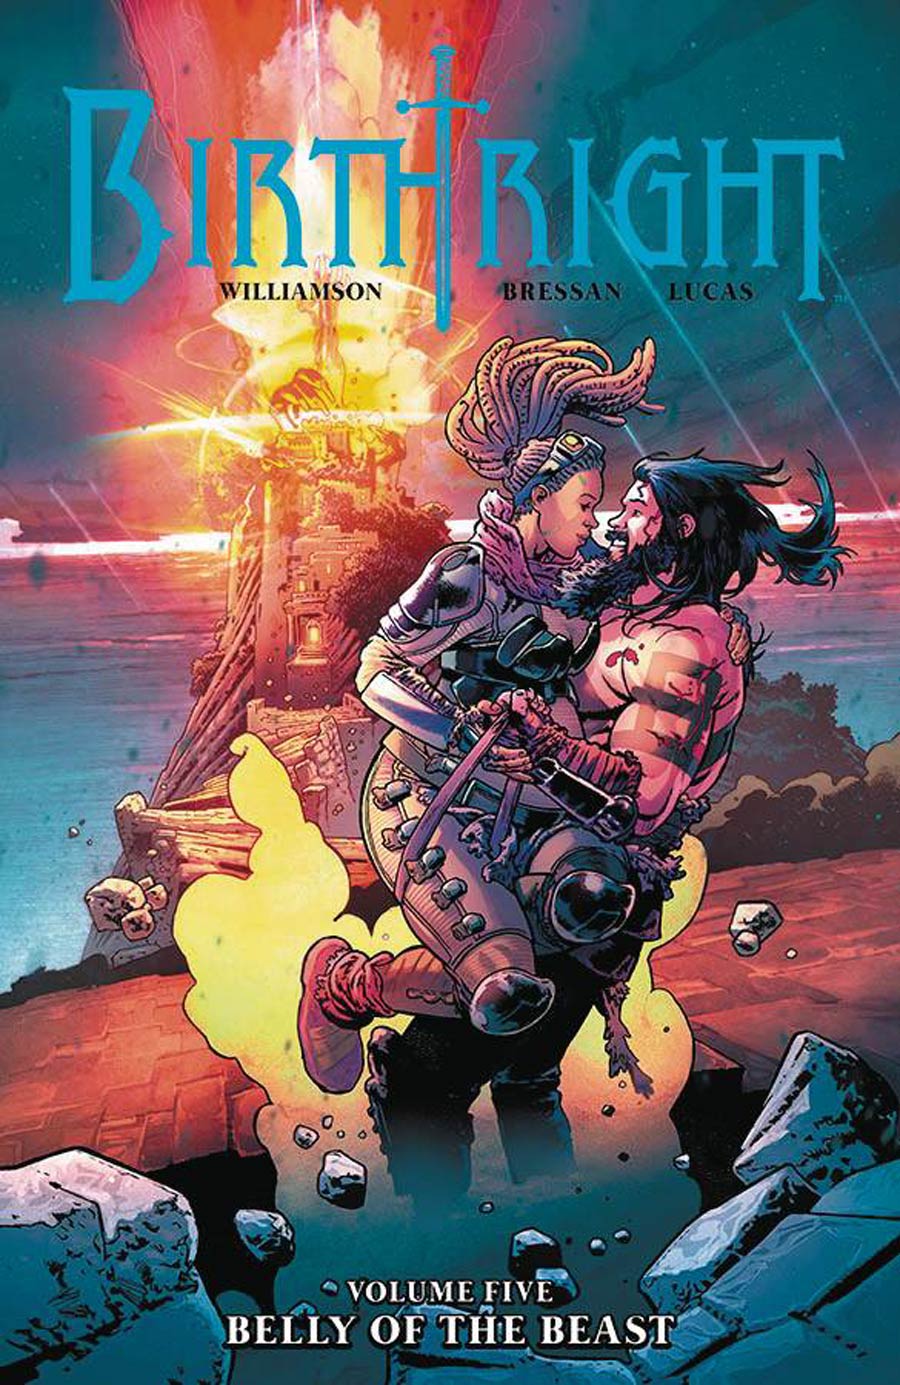 Birthright Vol 5 Belly Of The Beast TP